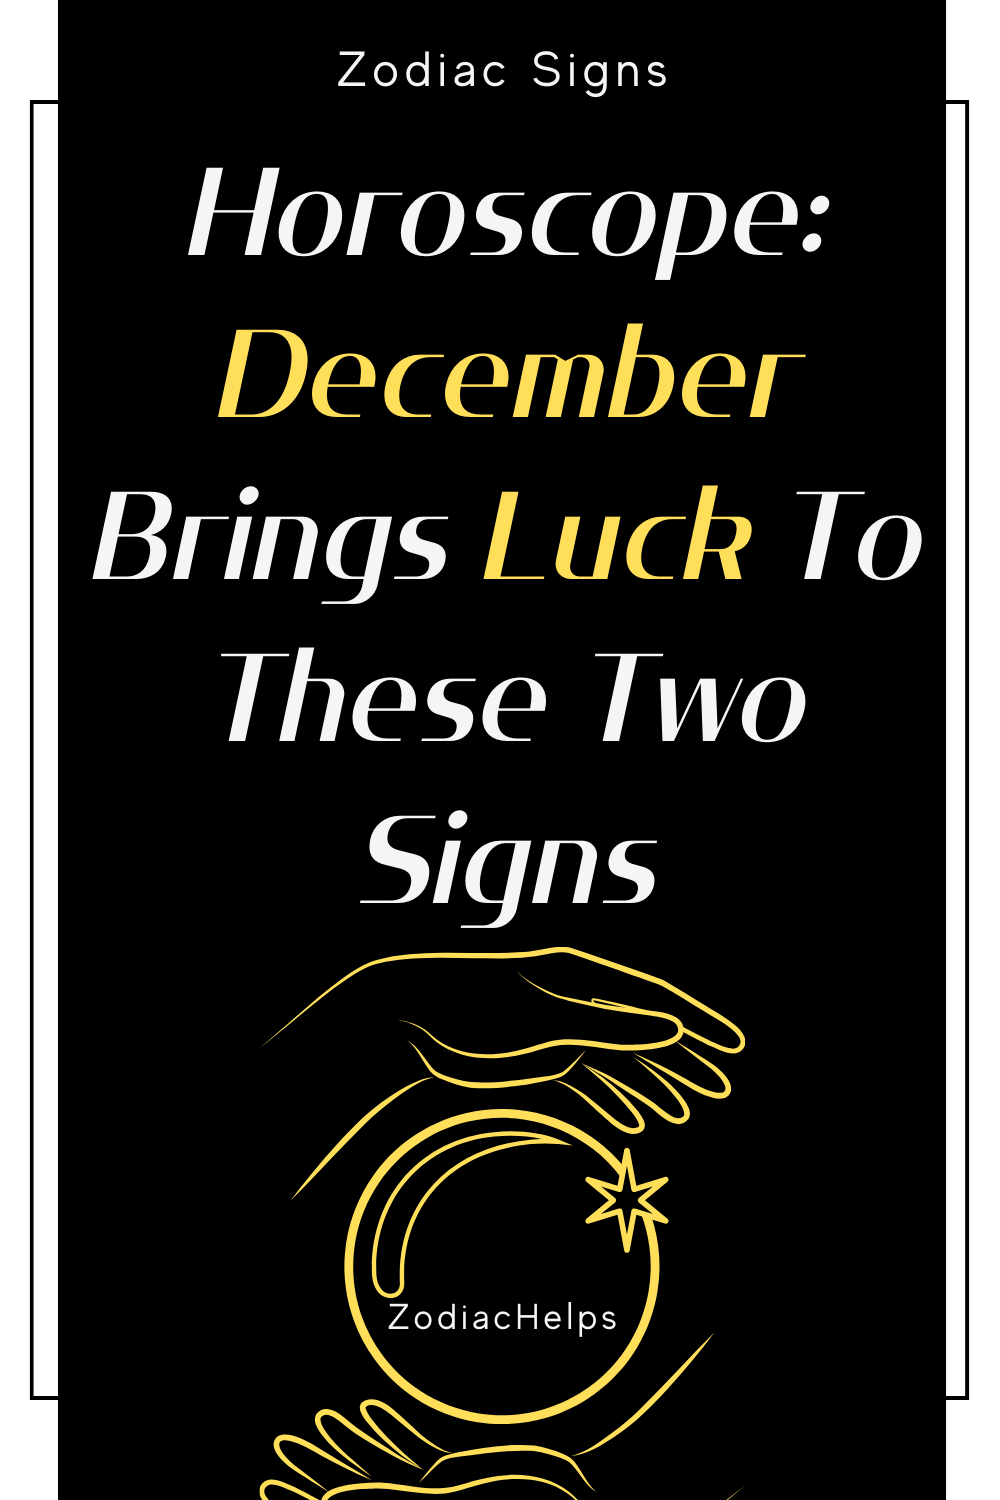 Horoscope: December Brings Luck To These Two Signs